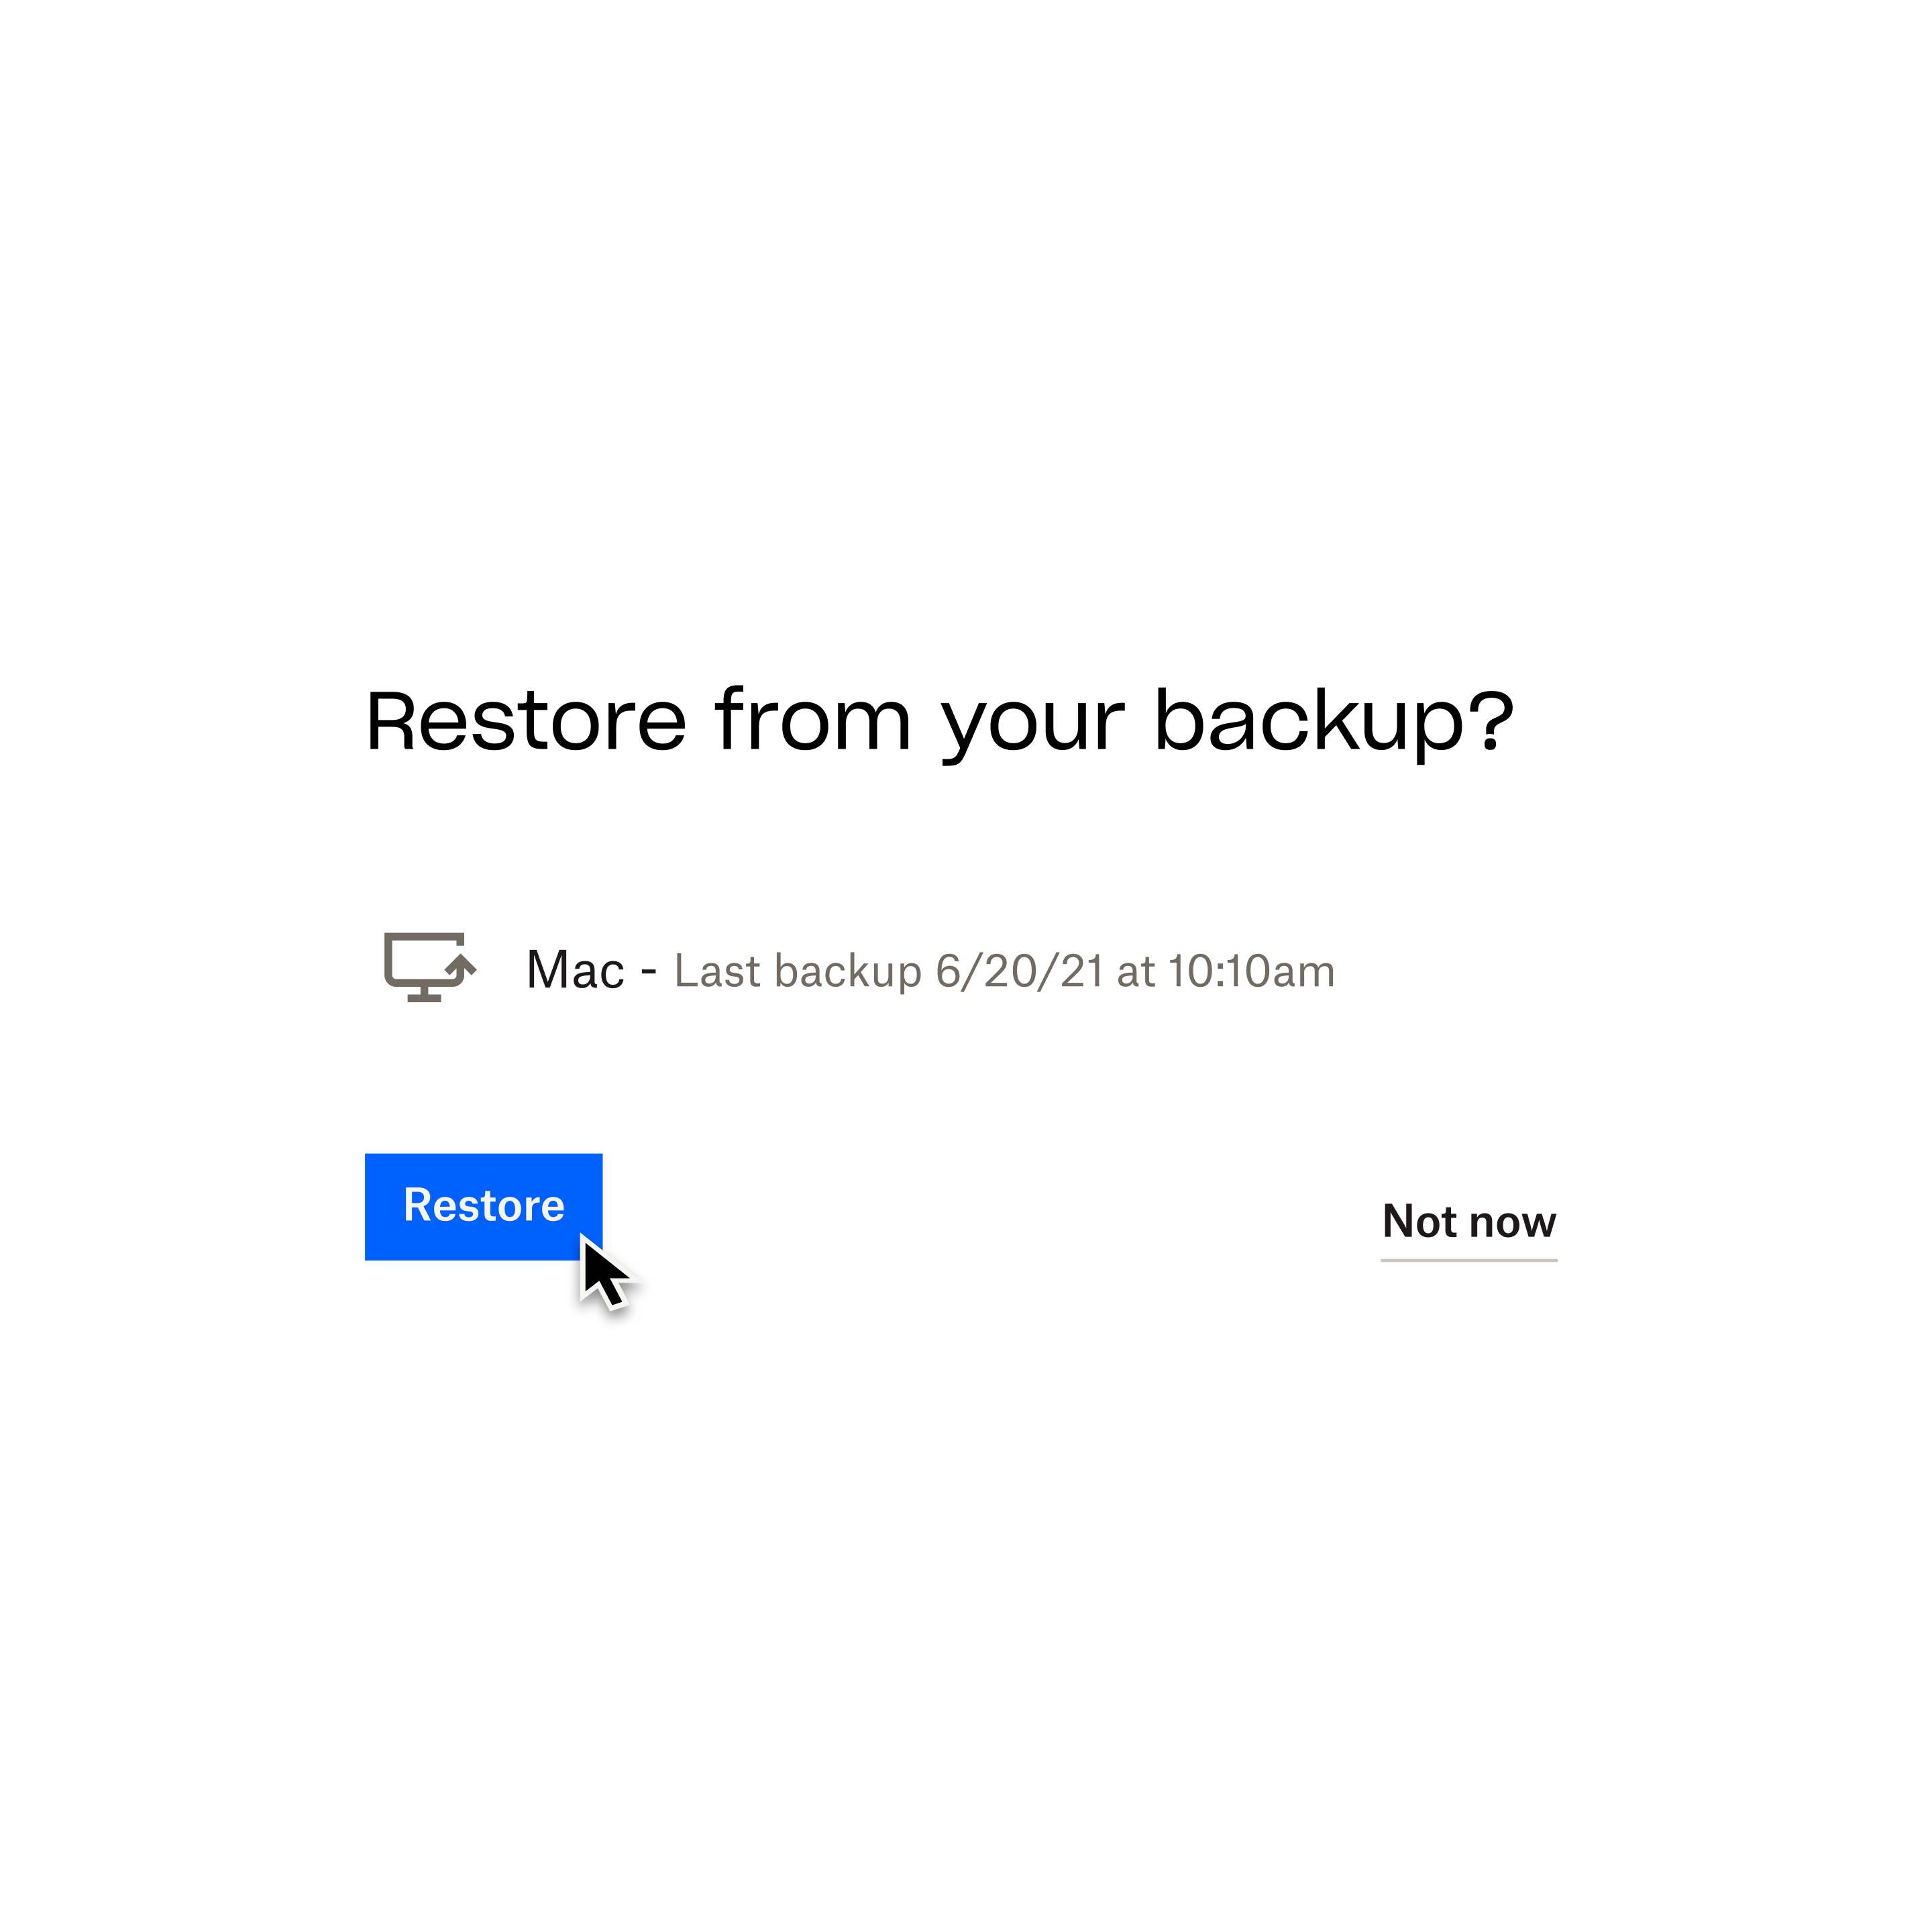 A screenshot of a Dropbox Backup prompt asking “Restore from your backup?”, with a mouse cursor hovering over a button labelled “Restore”.